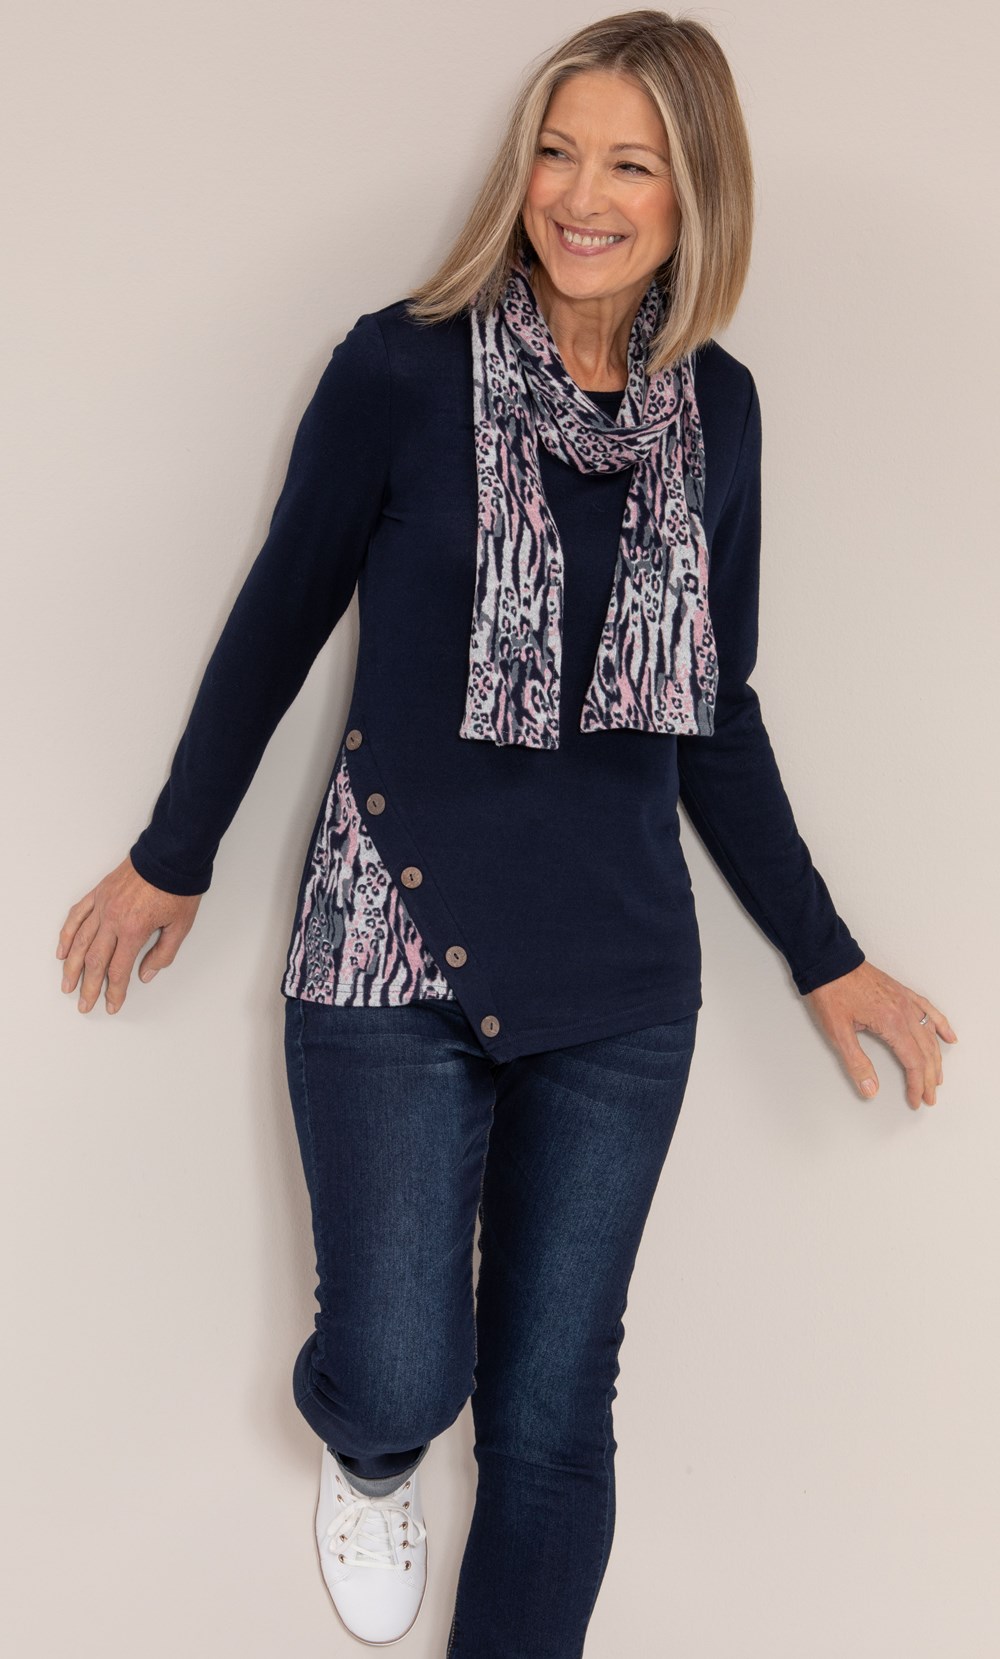 Anna Rose Brushed Knit Top With Scarf